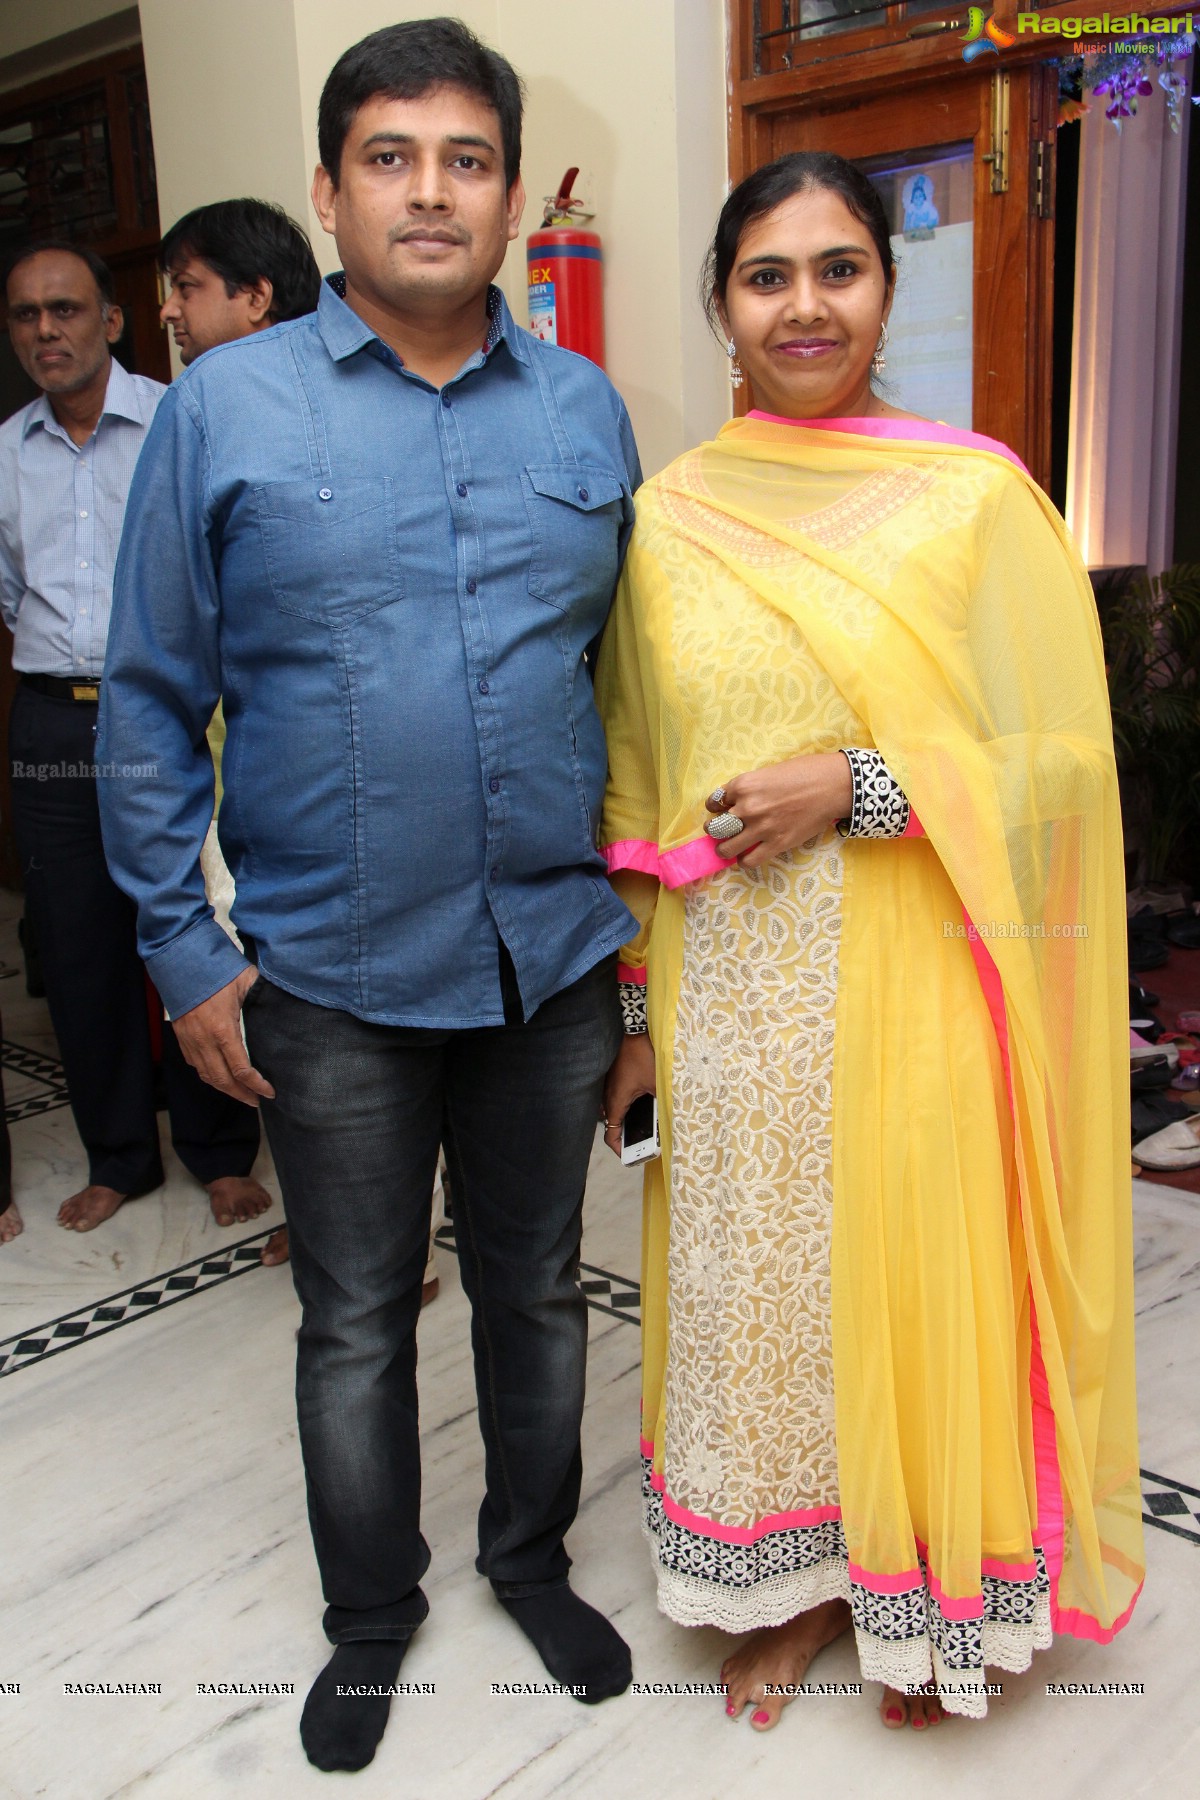 Get-Together Party by Mr and Mrs Reena Agarwal at Haryana Bhavan, Secunderabad